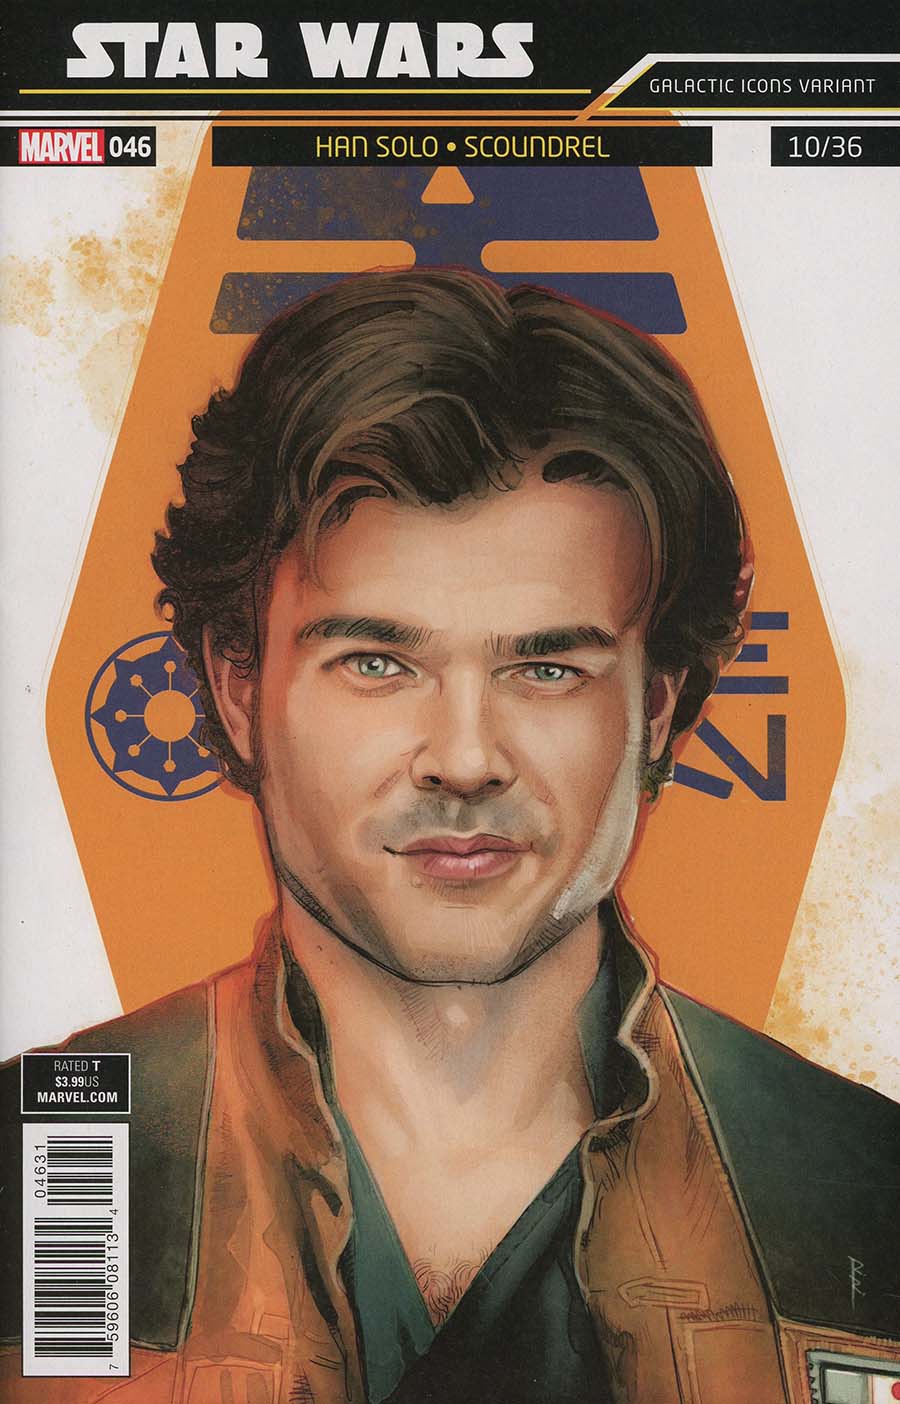 Star Wars Vol 4 #46 Cover C Variant Rod Reis Galactic Icon Cover